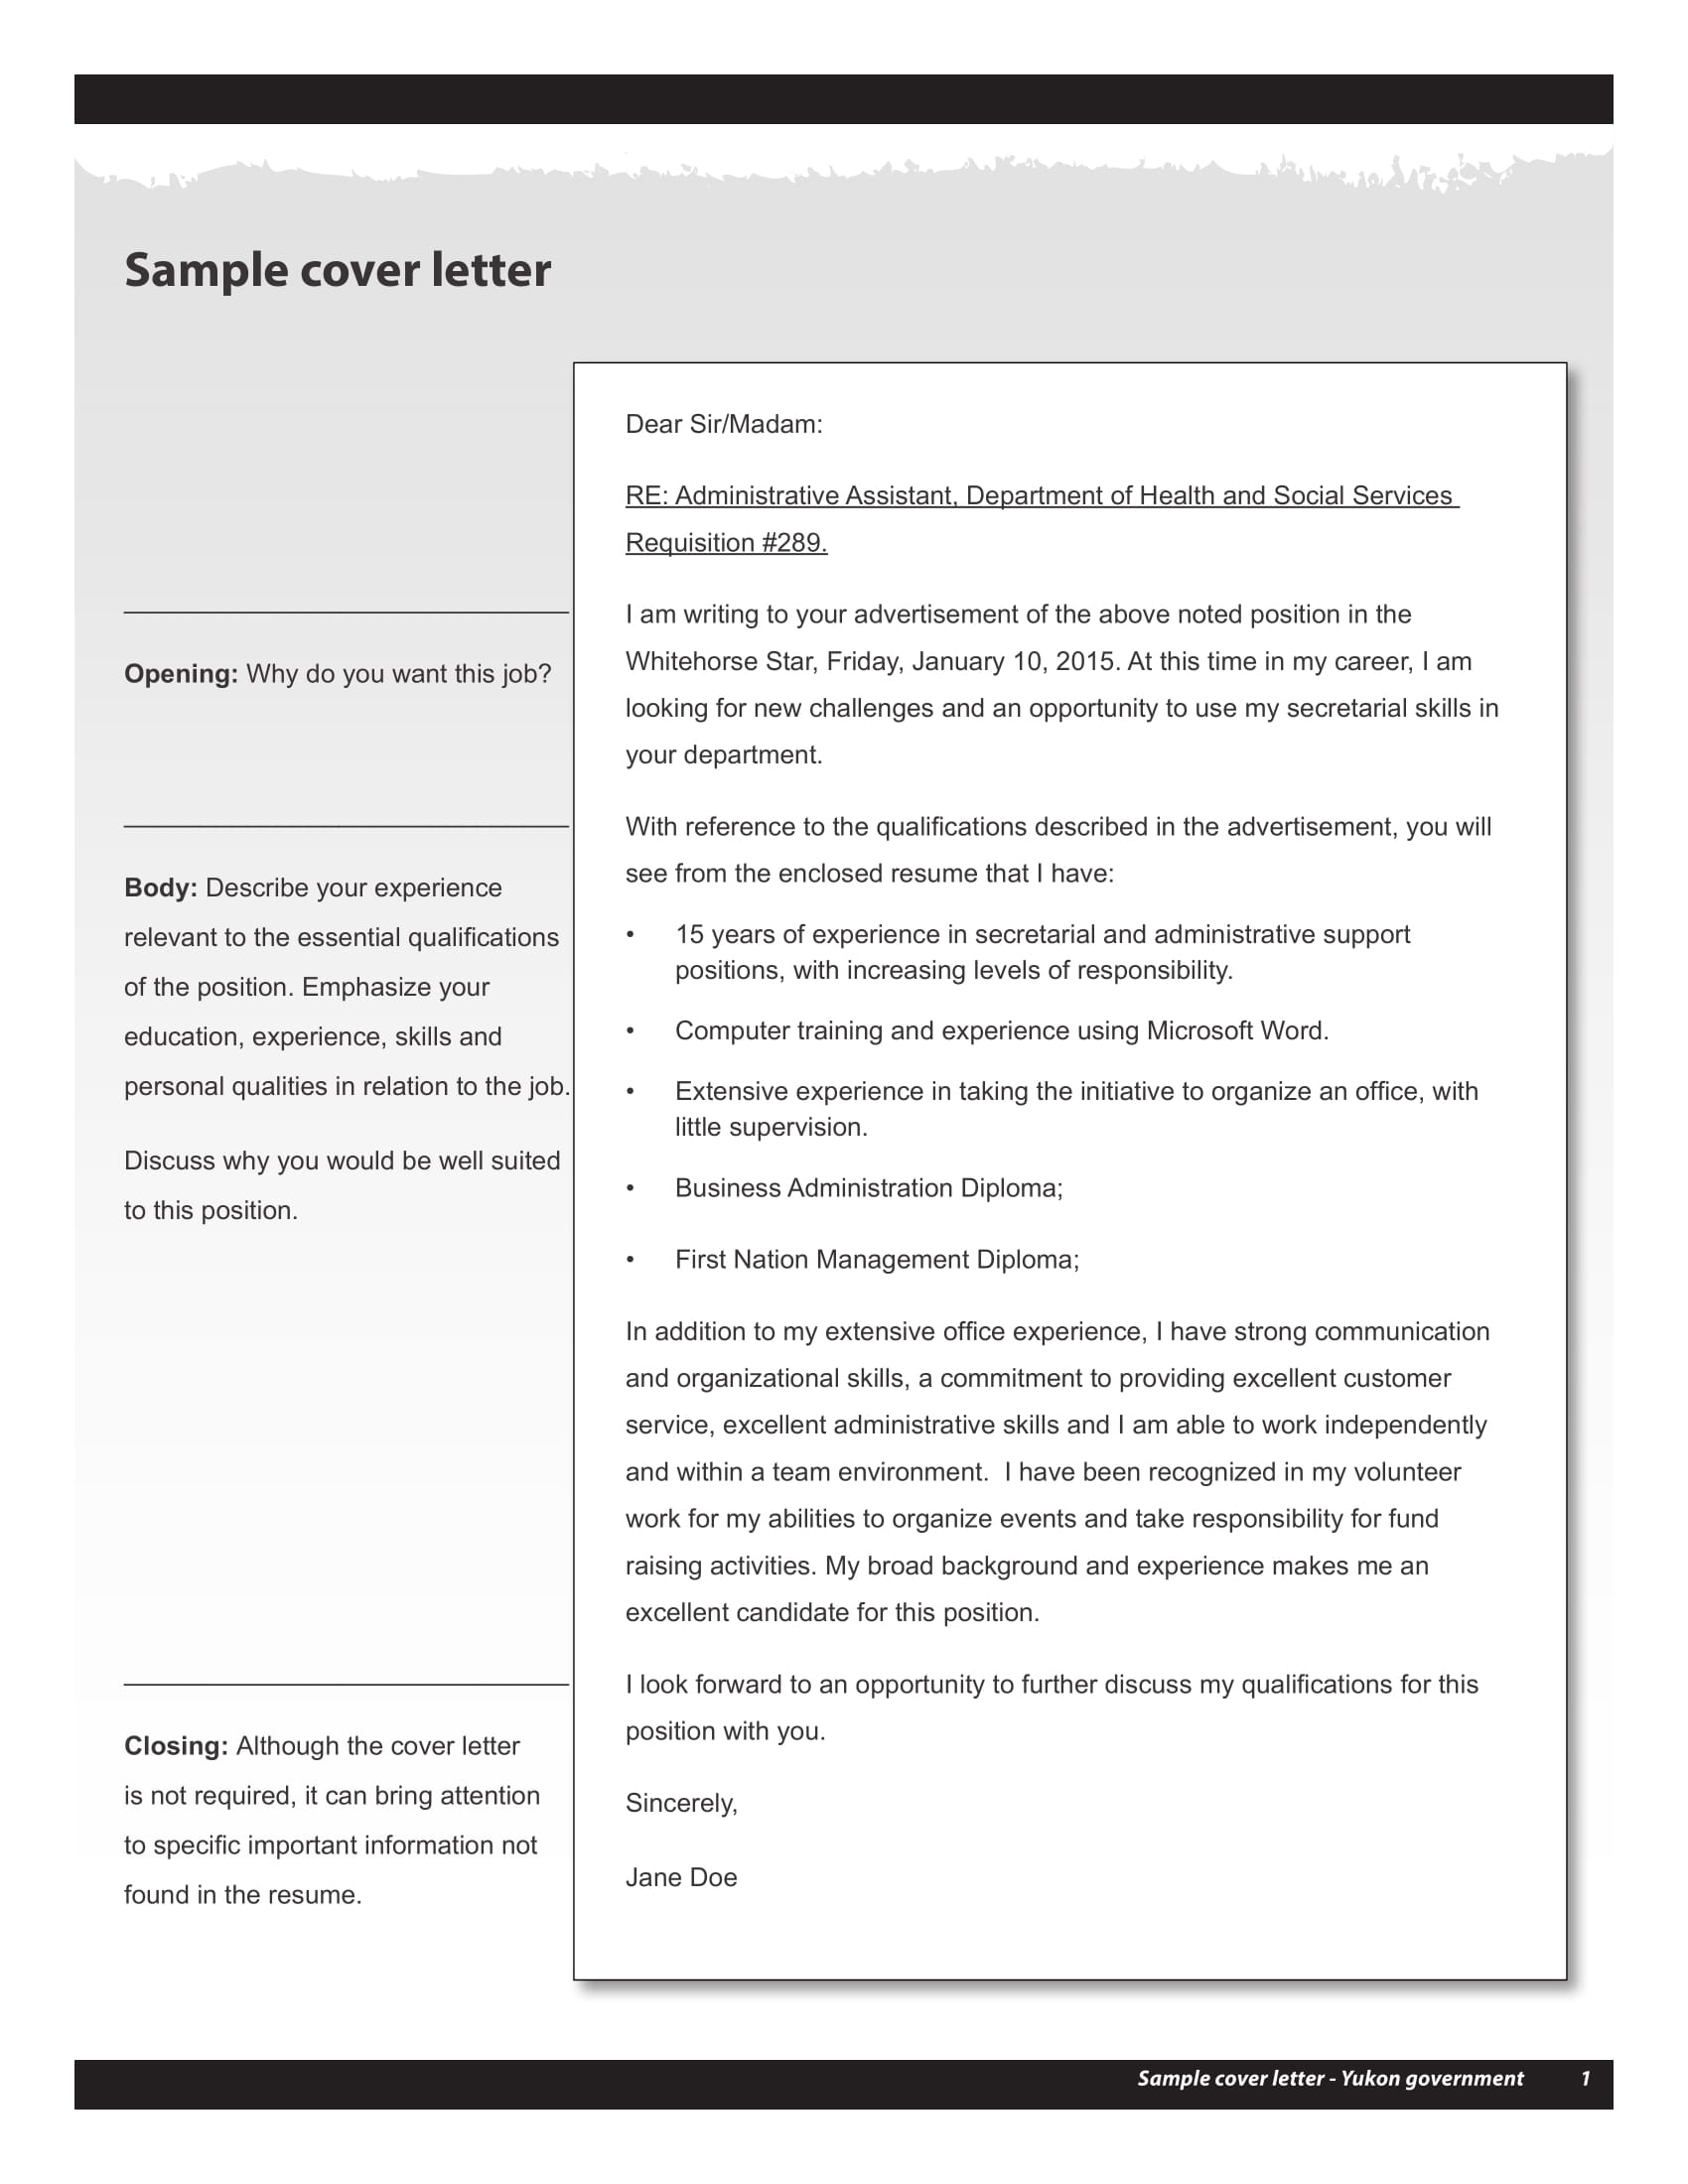 Professional Cover Letter - 10+ Examples, Format, Sample | Examples